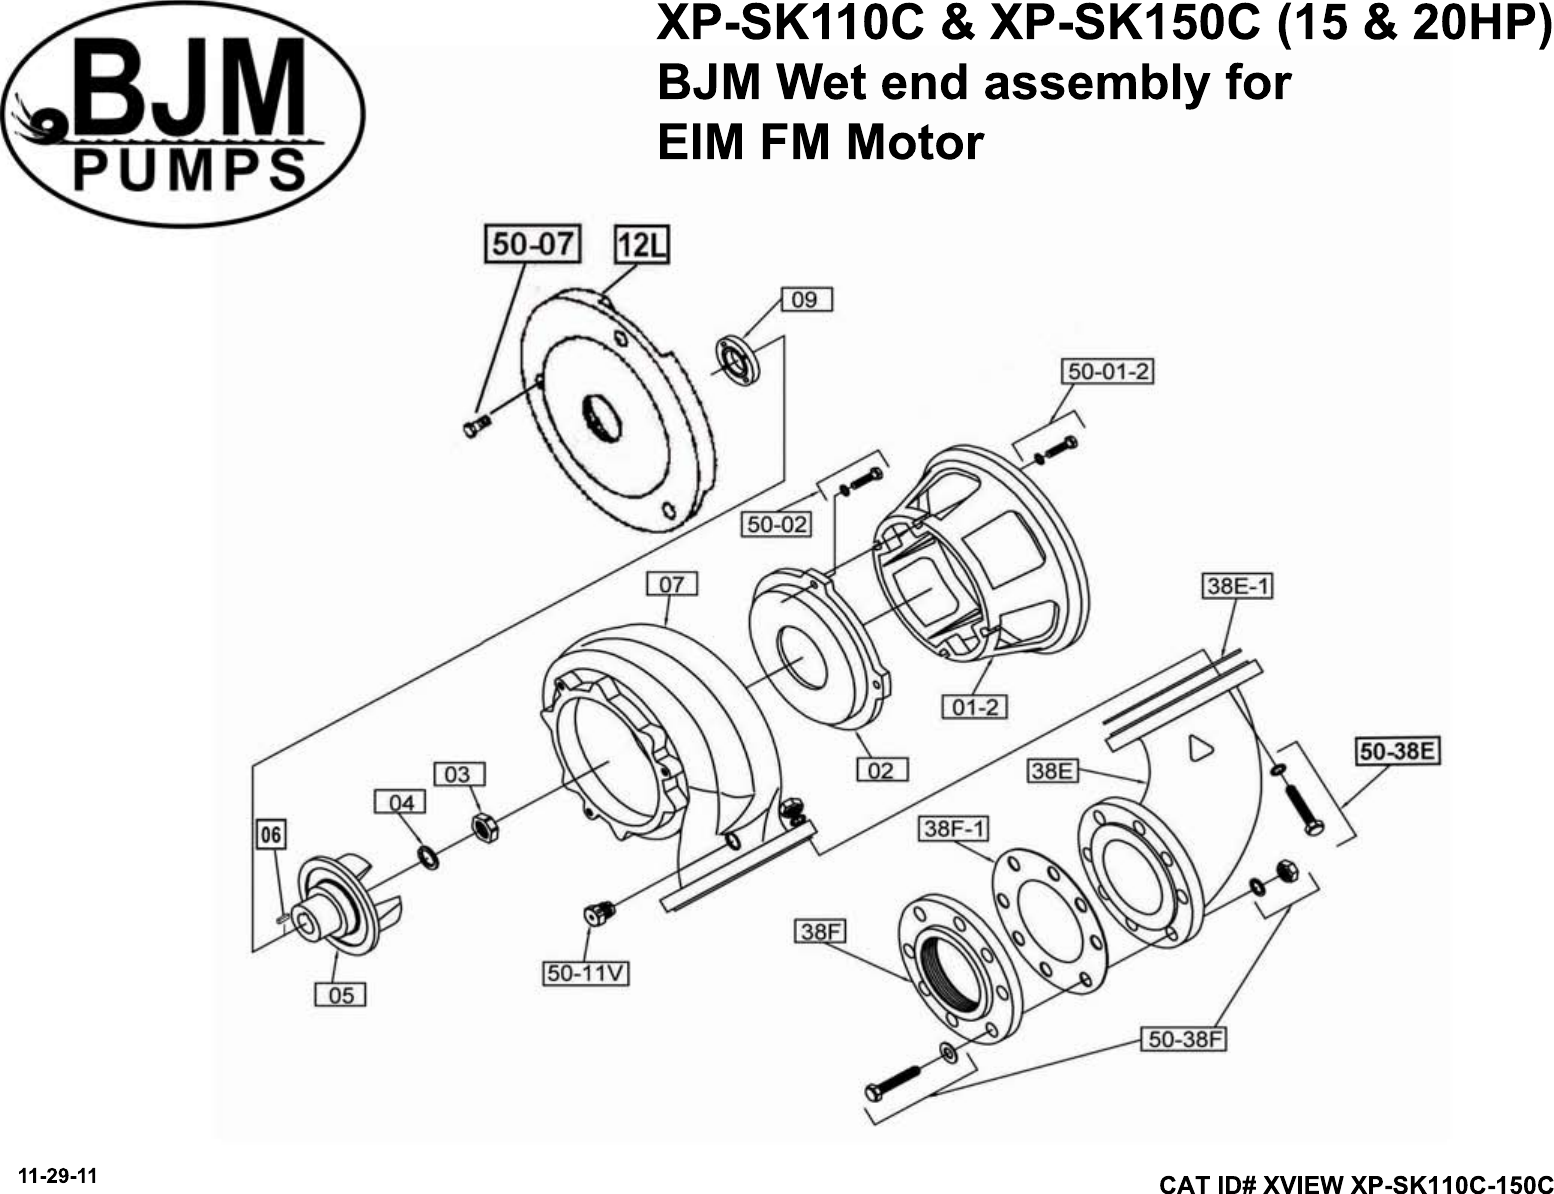 Page 4 of 4 - 136506 6 Bjm Xp-Sk Series Exploded View SK-XView-SK08C-SK15C 04-29-04.bmp User Manual